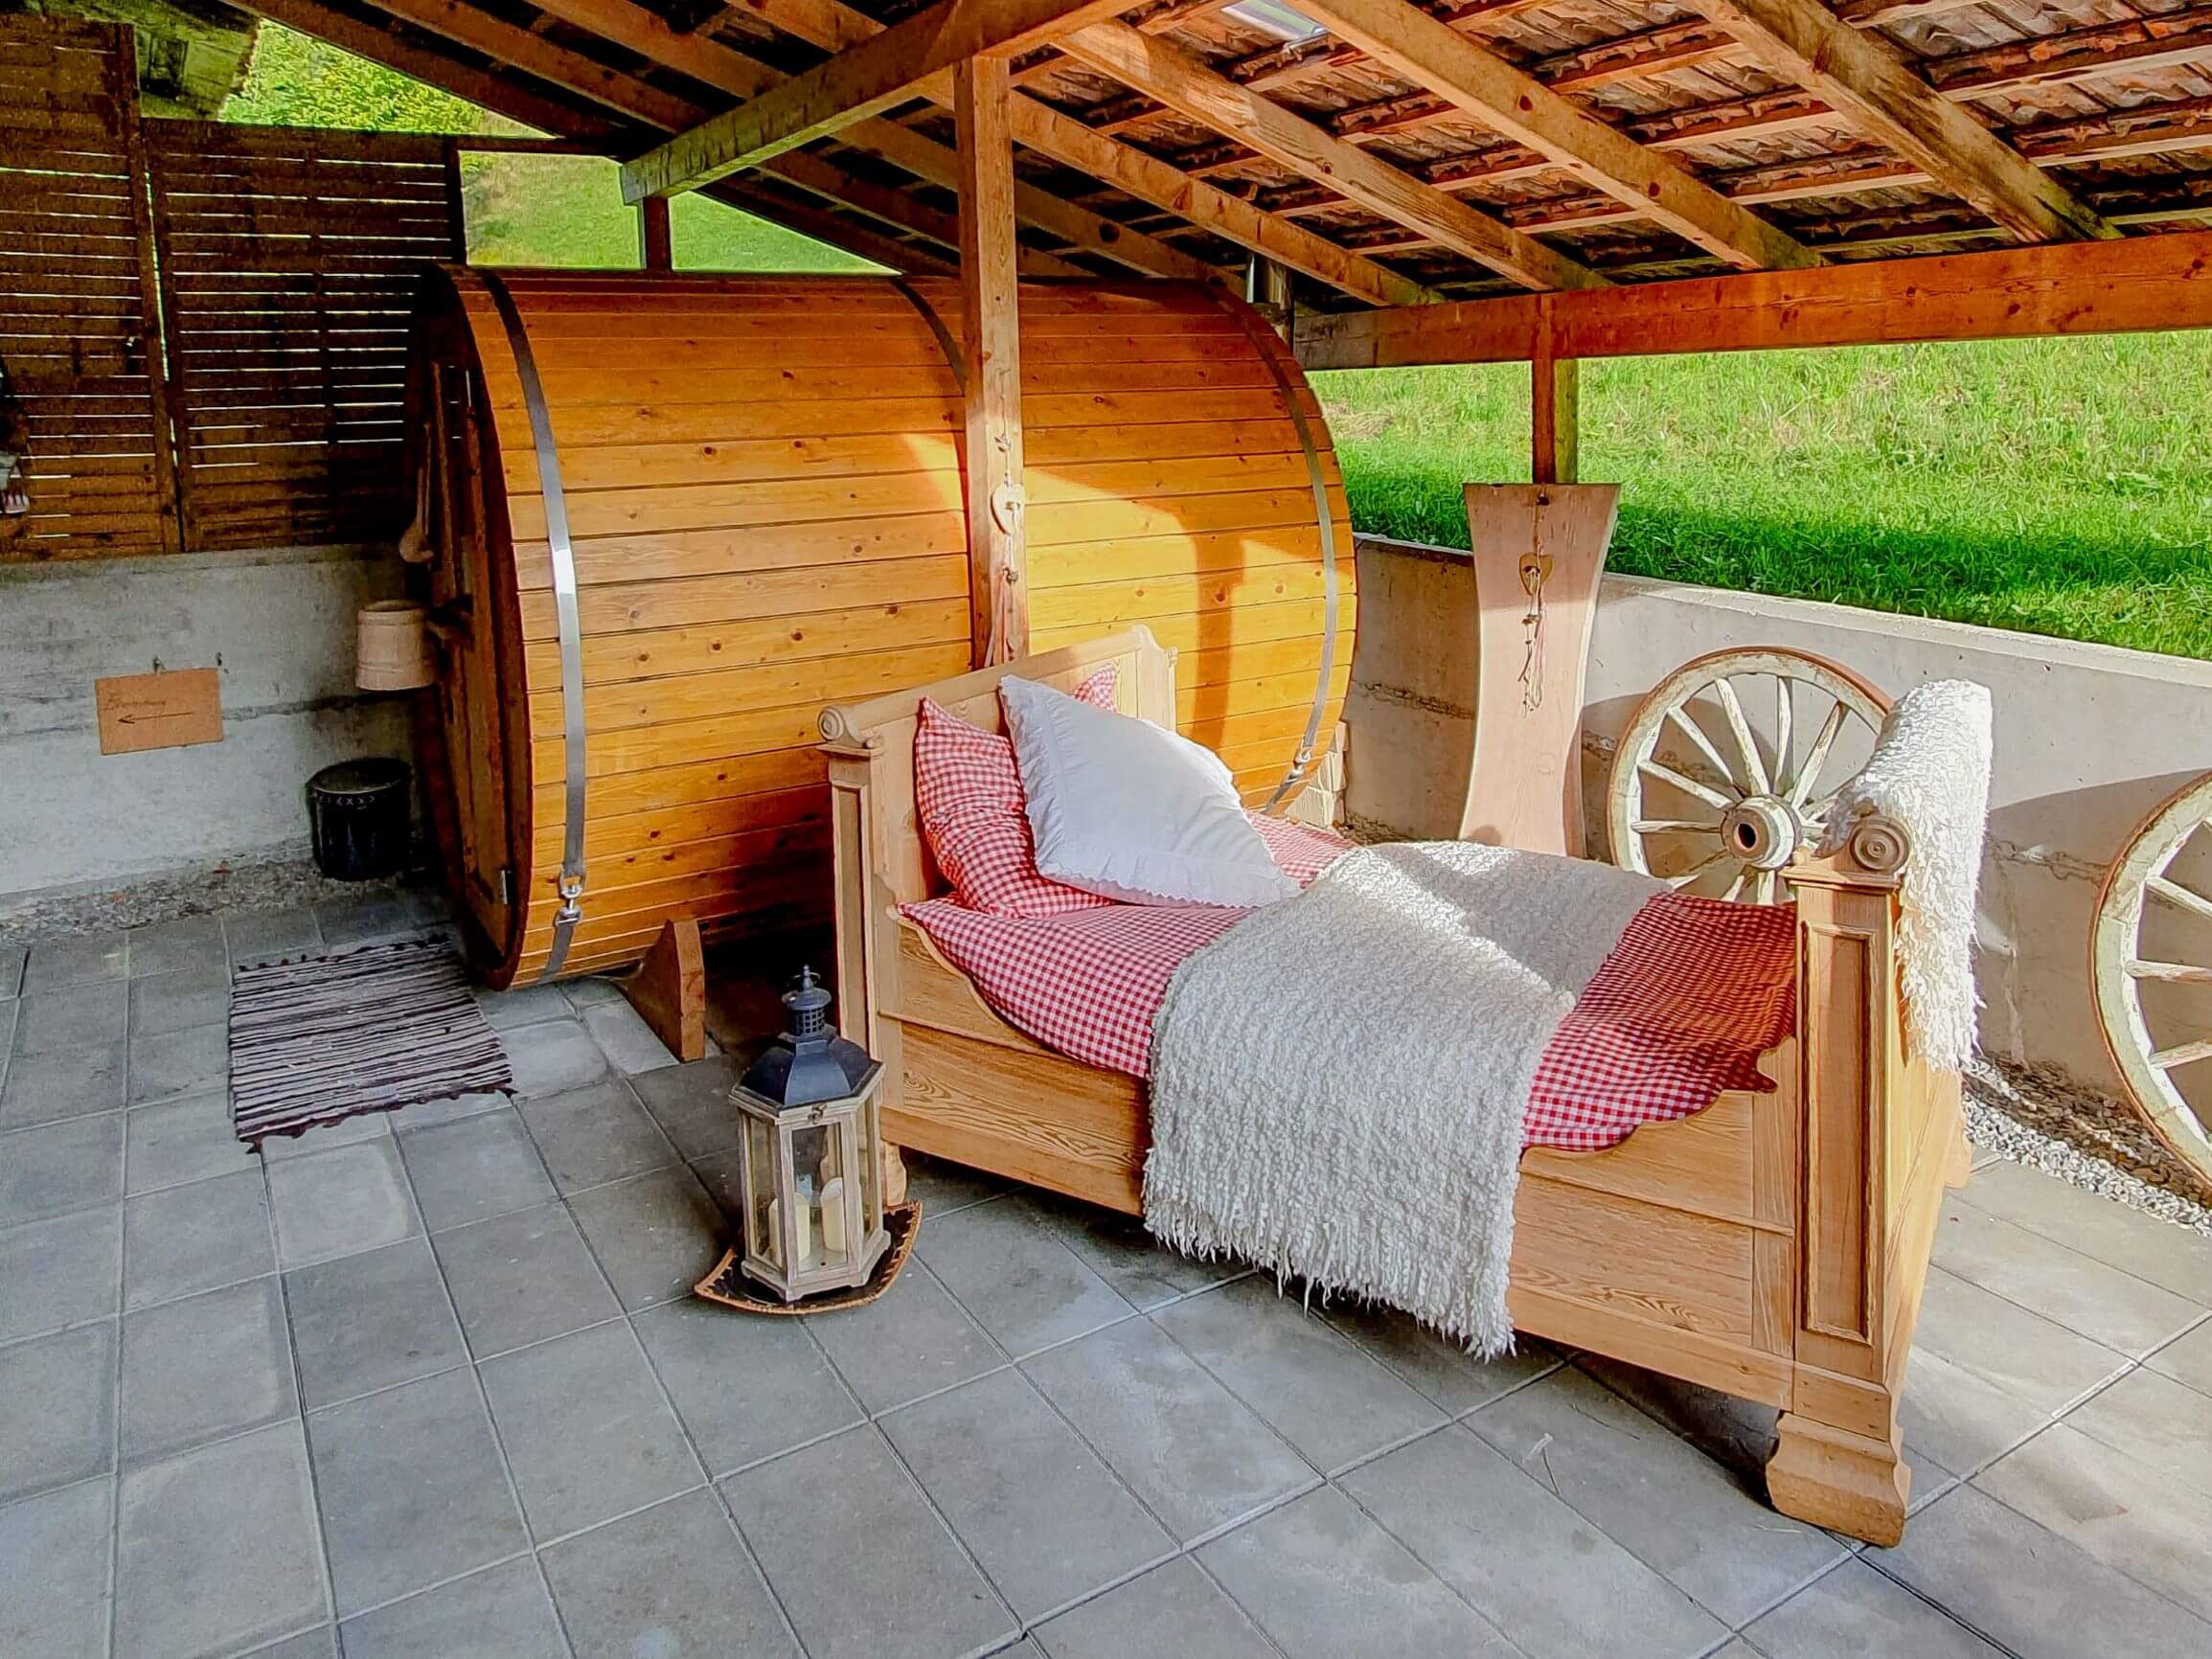 Sauna and wooden couch